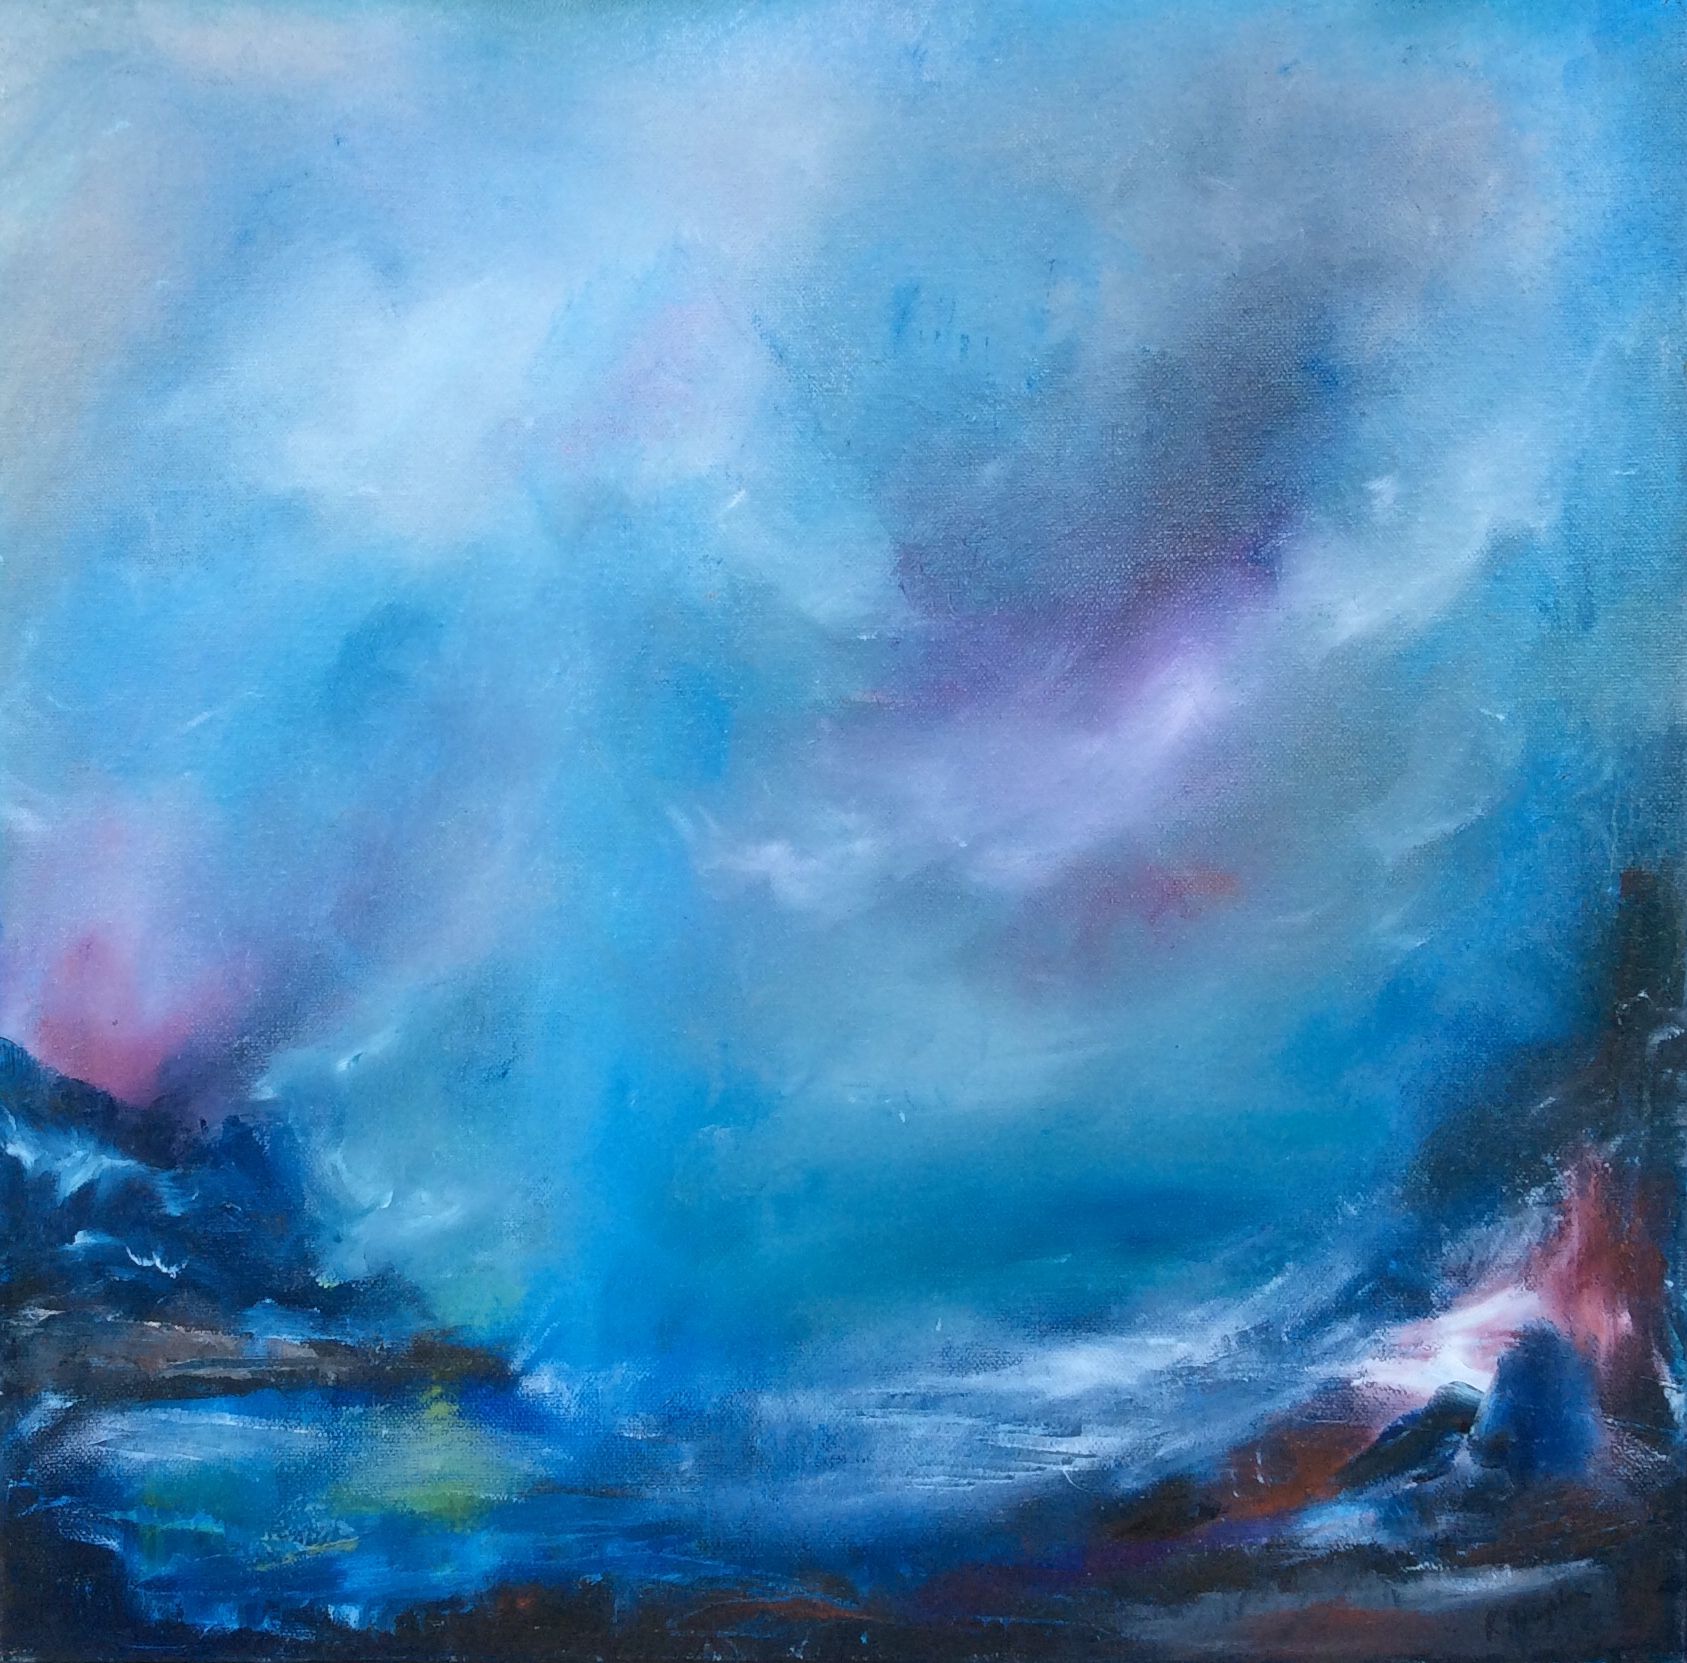 Storm at sea by Rosemary Houghton